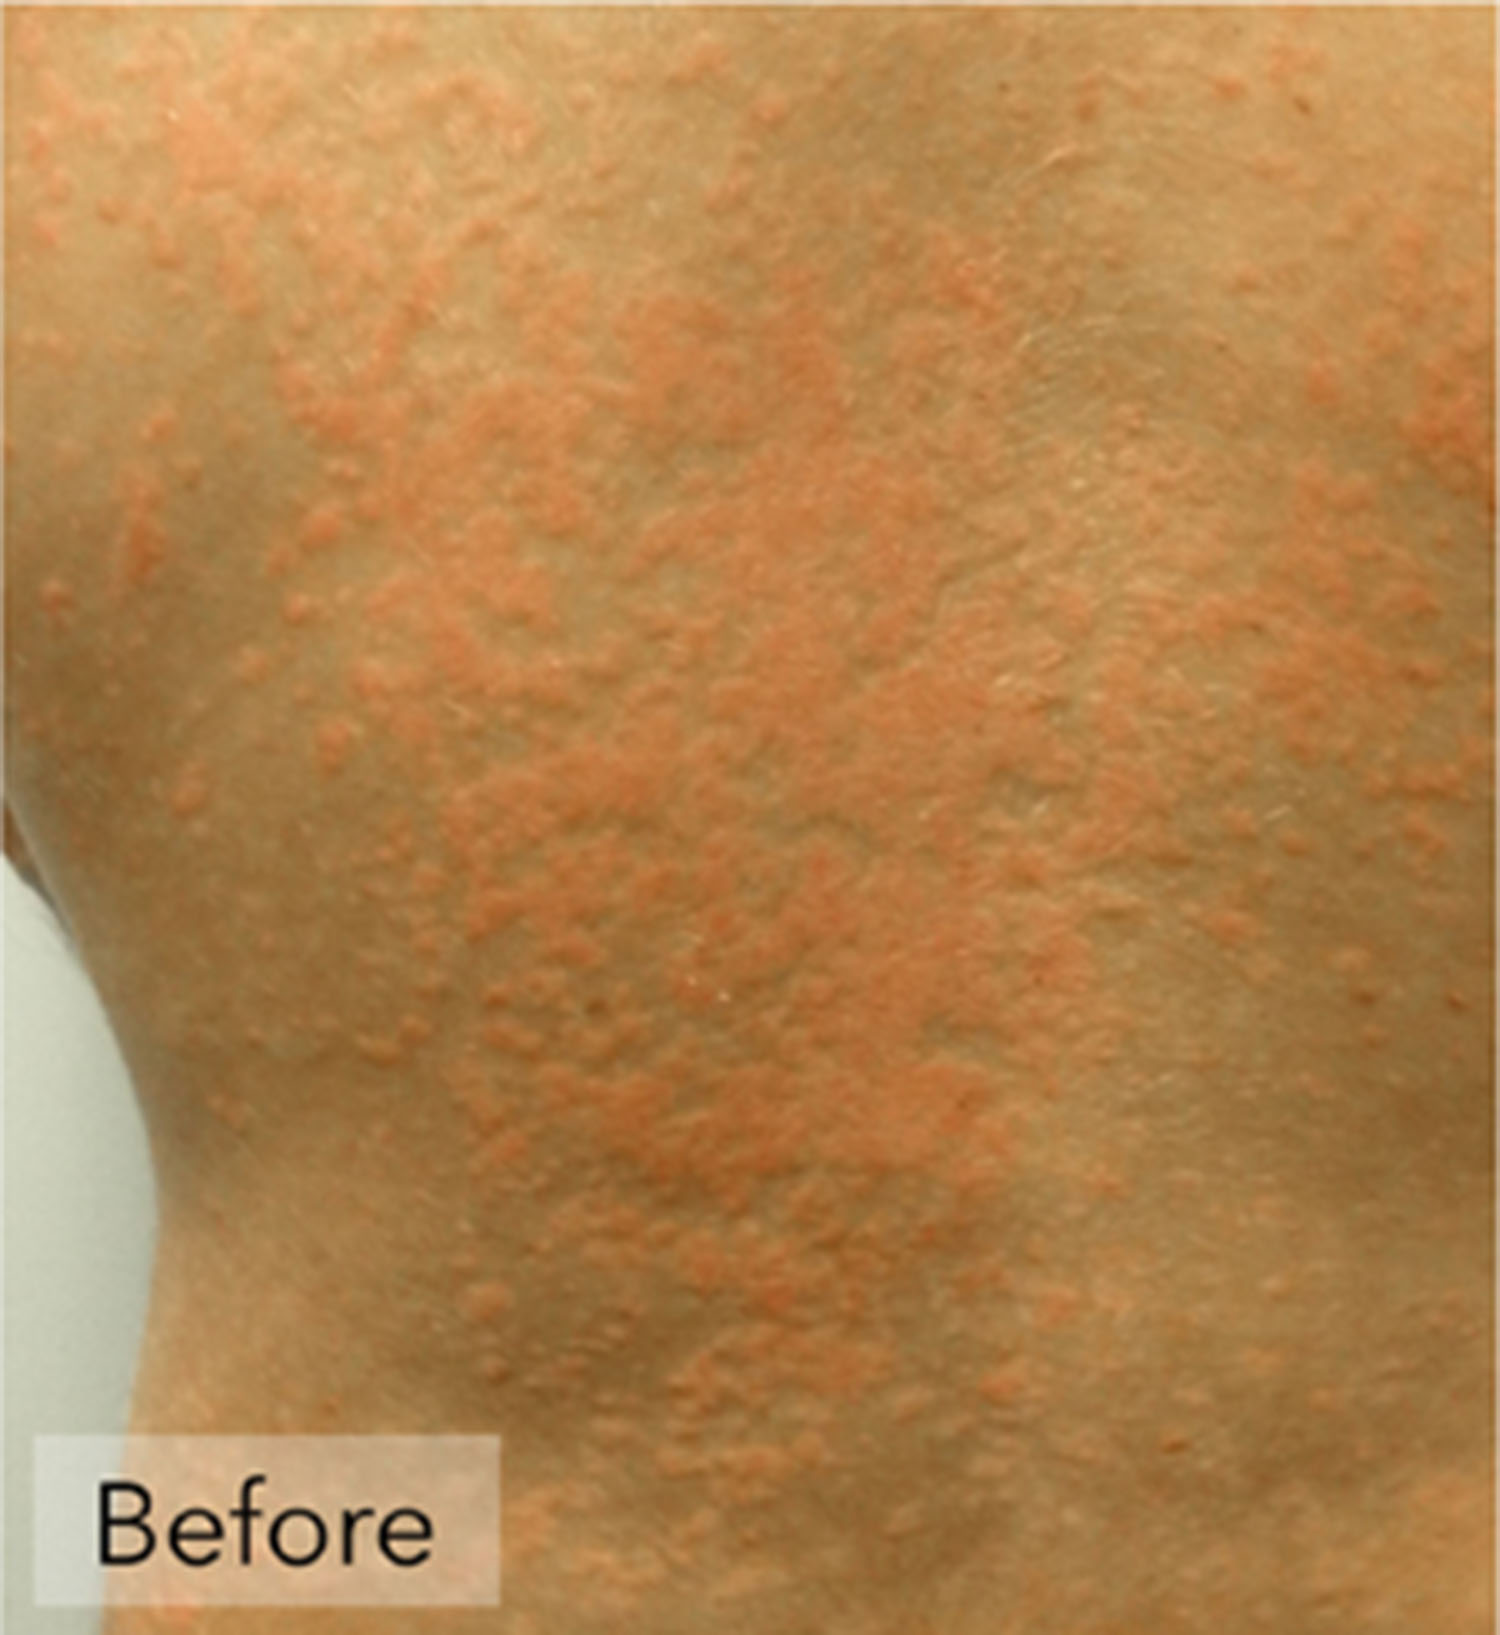 Psoriasis Before